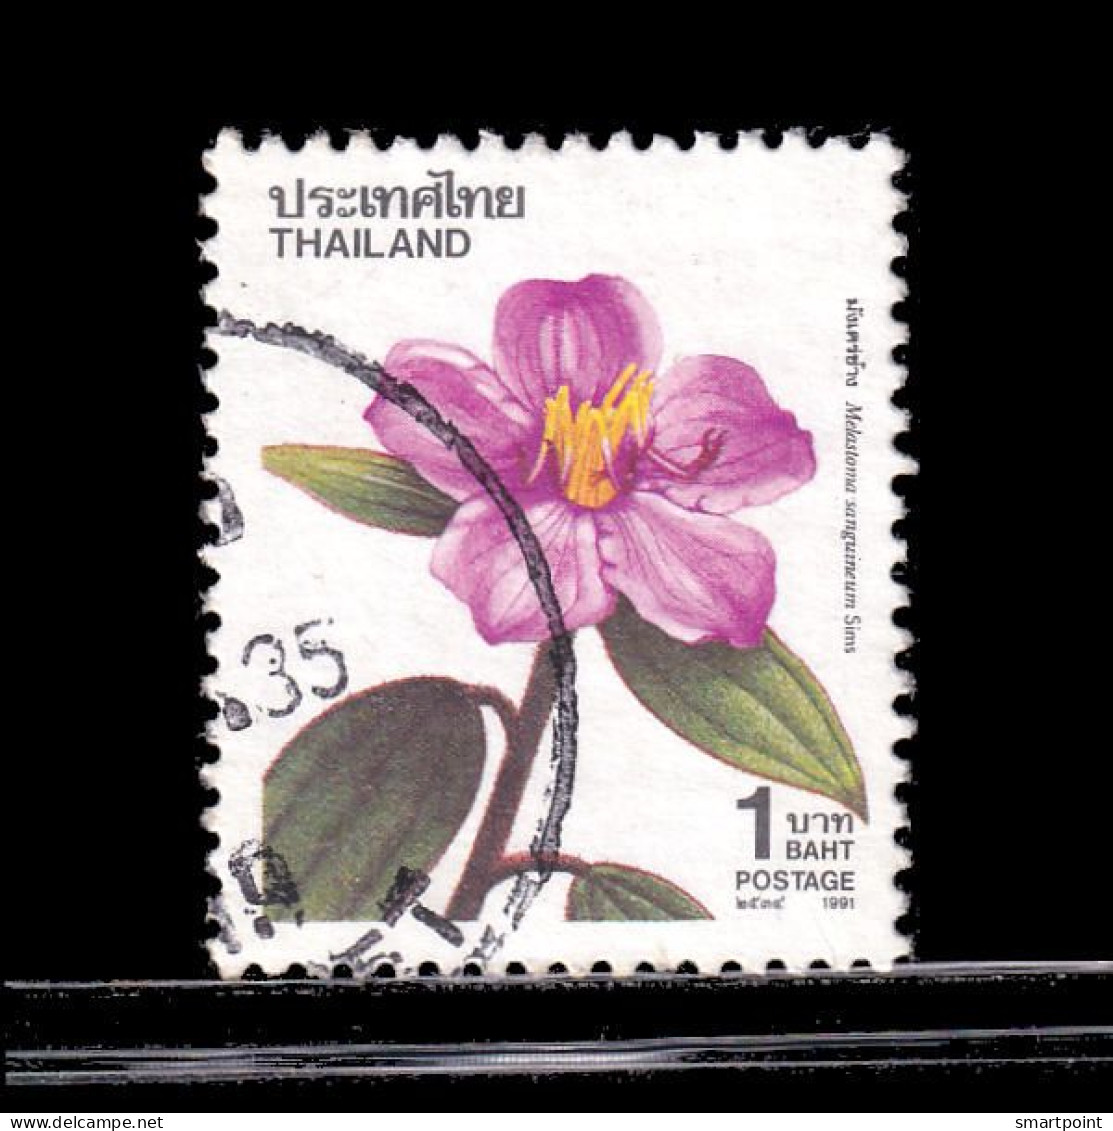 Thailand Stamp 1991 1992 New Year (4th Series) 1 Baht - Used - Thailand